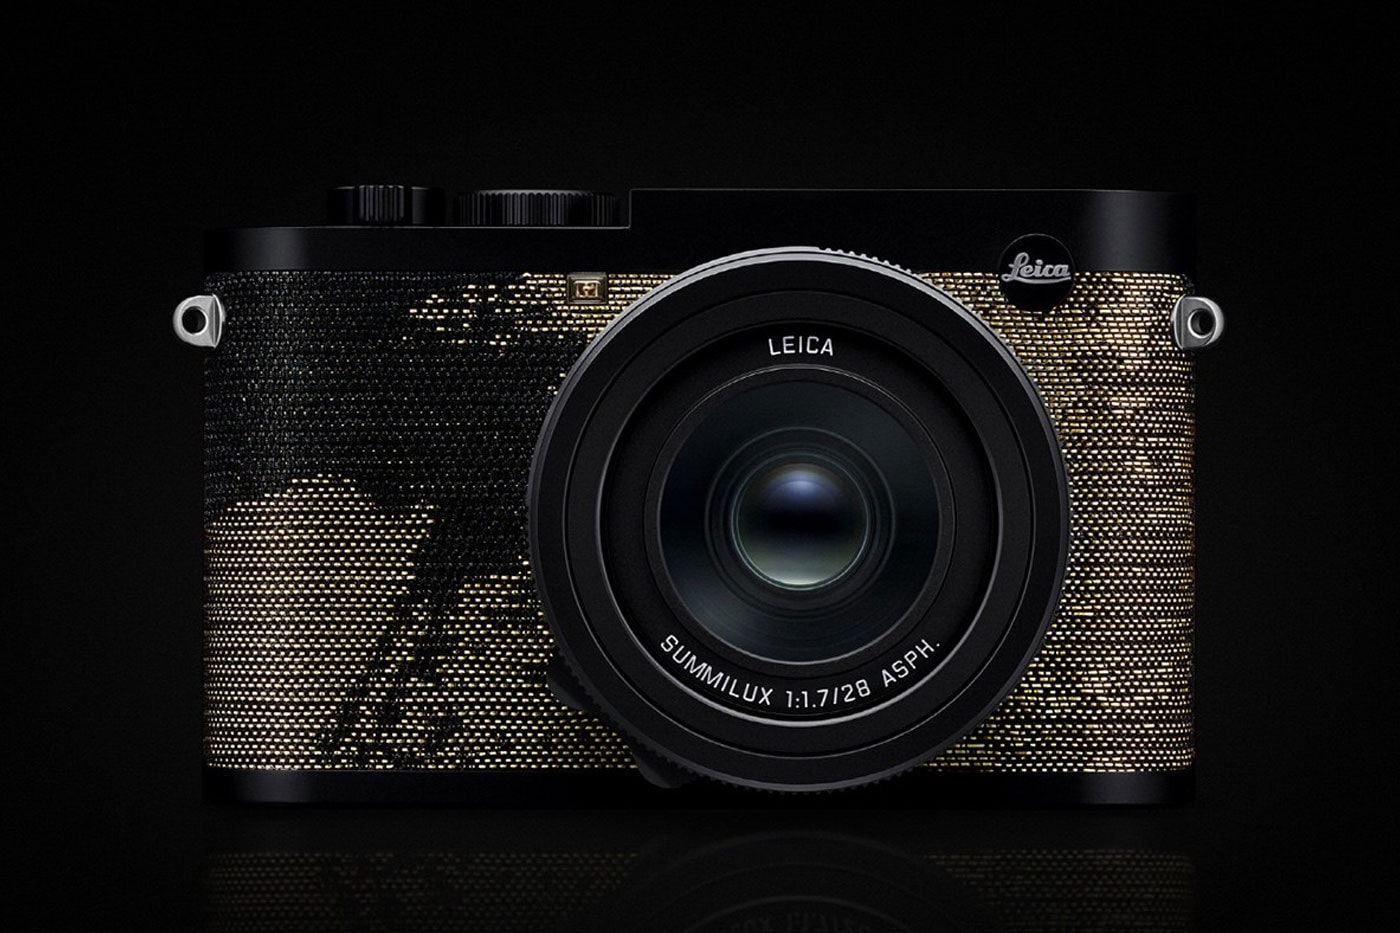 Leica Seal special edition camera AG dawn human connection 500 editions handwritten lyrics hosoo weave gold release info date price